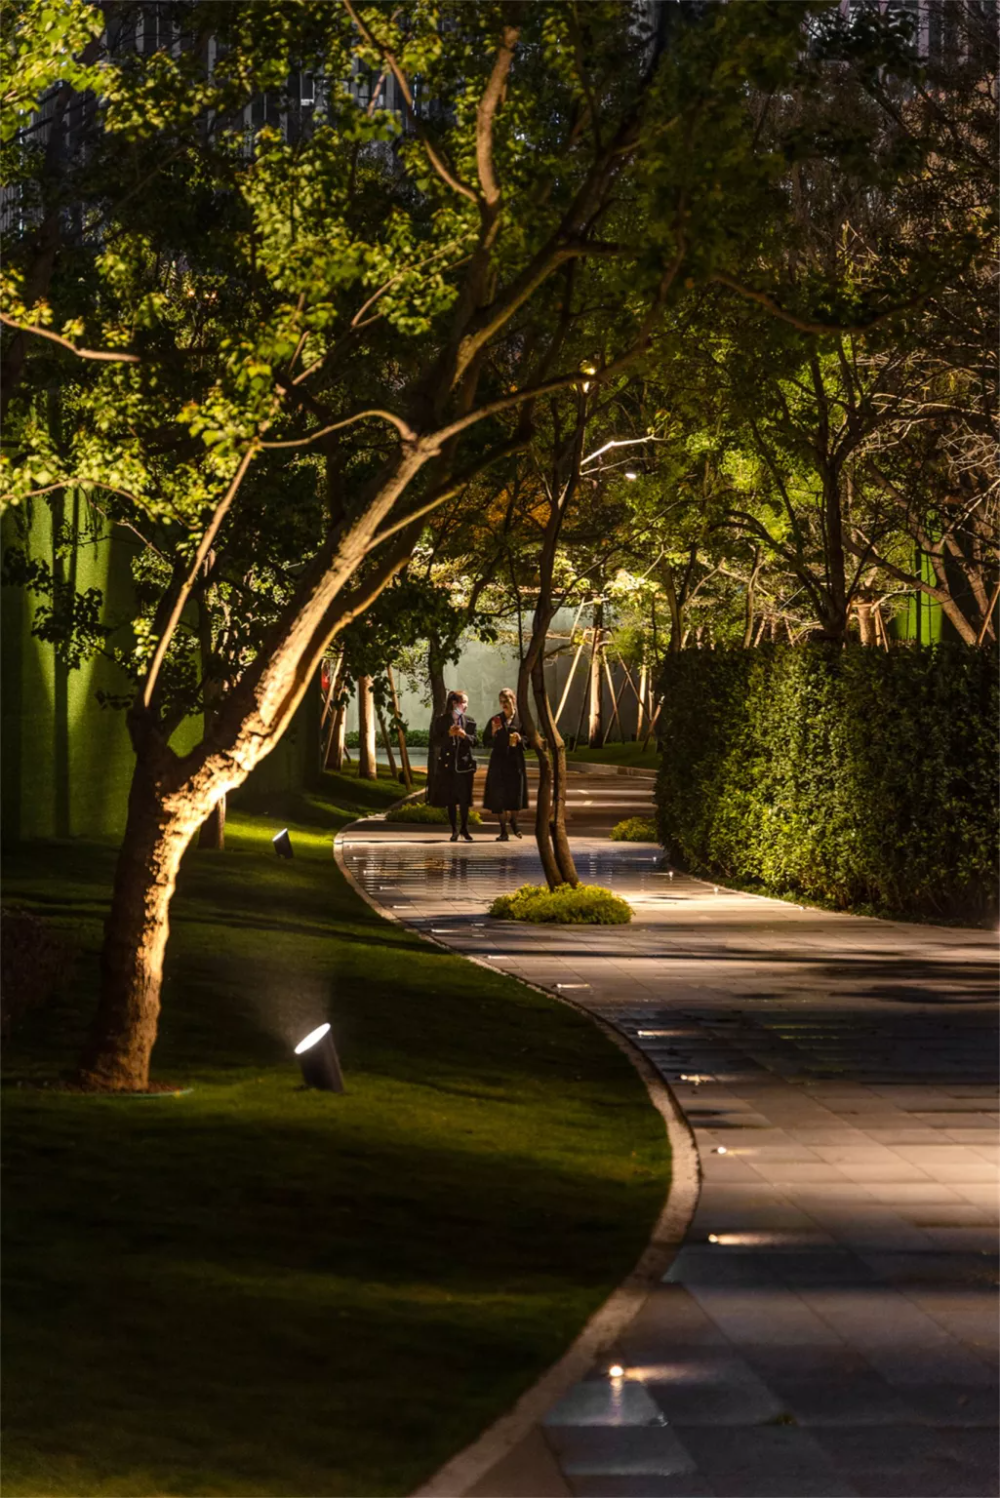 Illuminate Your Outdoor Spaces with Creative Landscape Lighting Designs